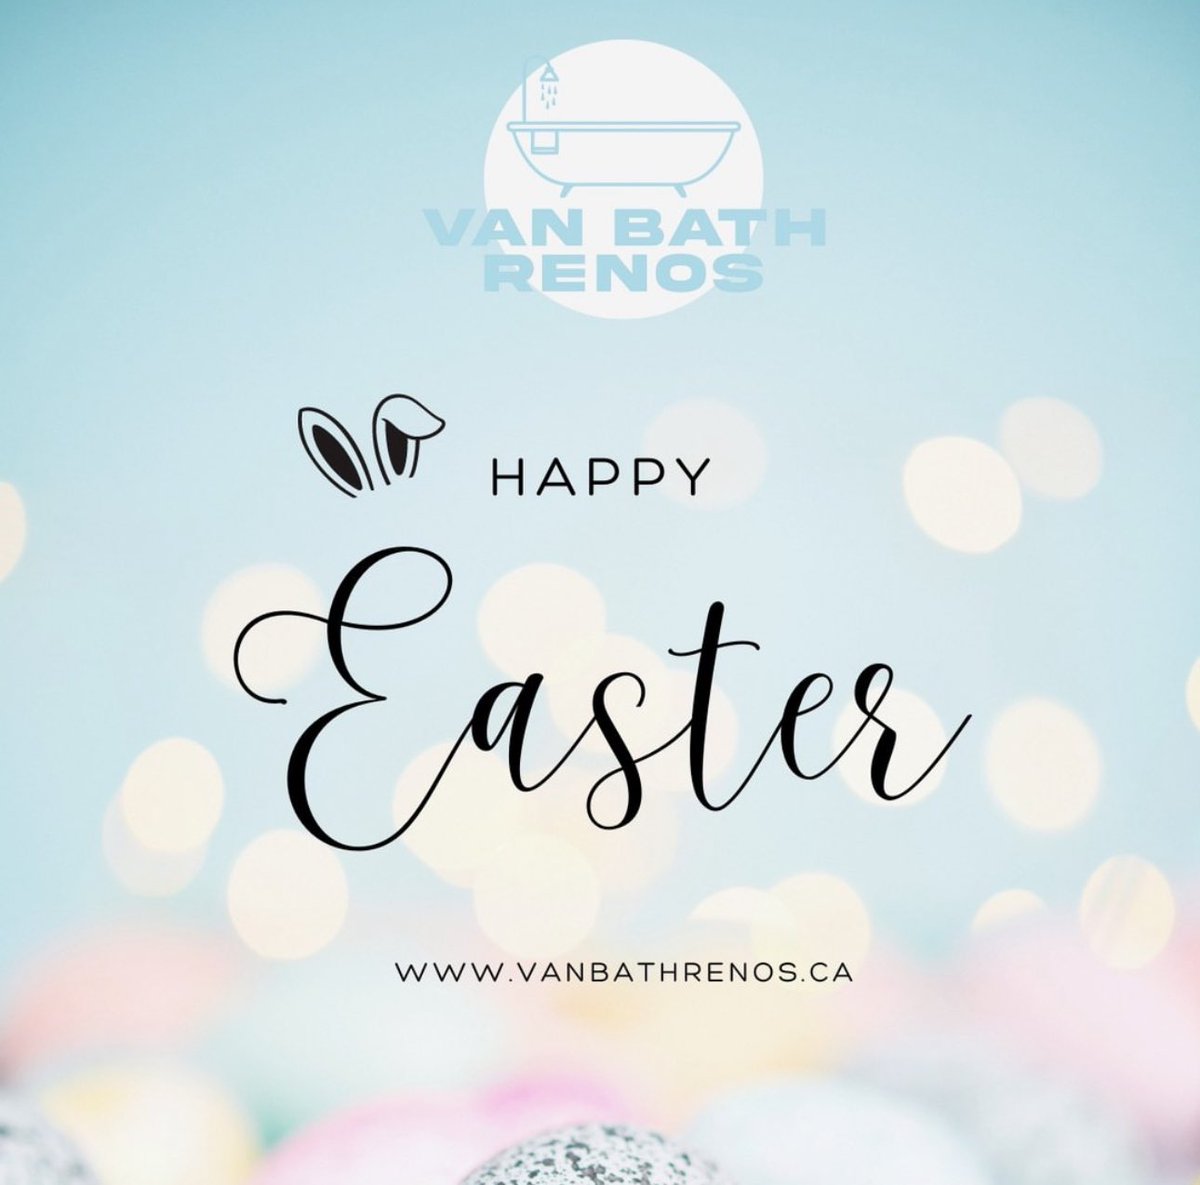 Happy Easter from all of us at Van Bath Renos! 🐰✨ 

Wishing you a day filled with joy, laughter, and the warmth of family. 

#HappyEaster #VanBathRenos #EasterJoy #FamilyTime #SpringCelebration #EasterBlessings #RenovationSeason #VancouverHomes #HolidayCheer #EasterMagic